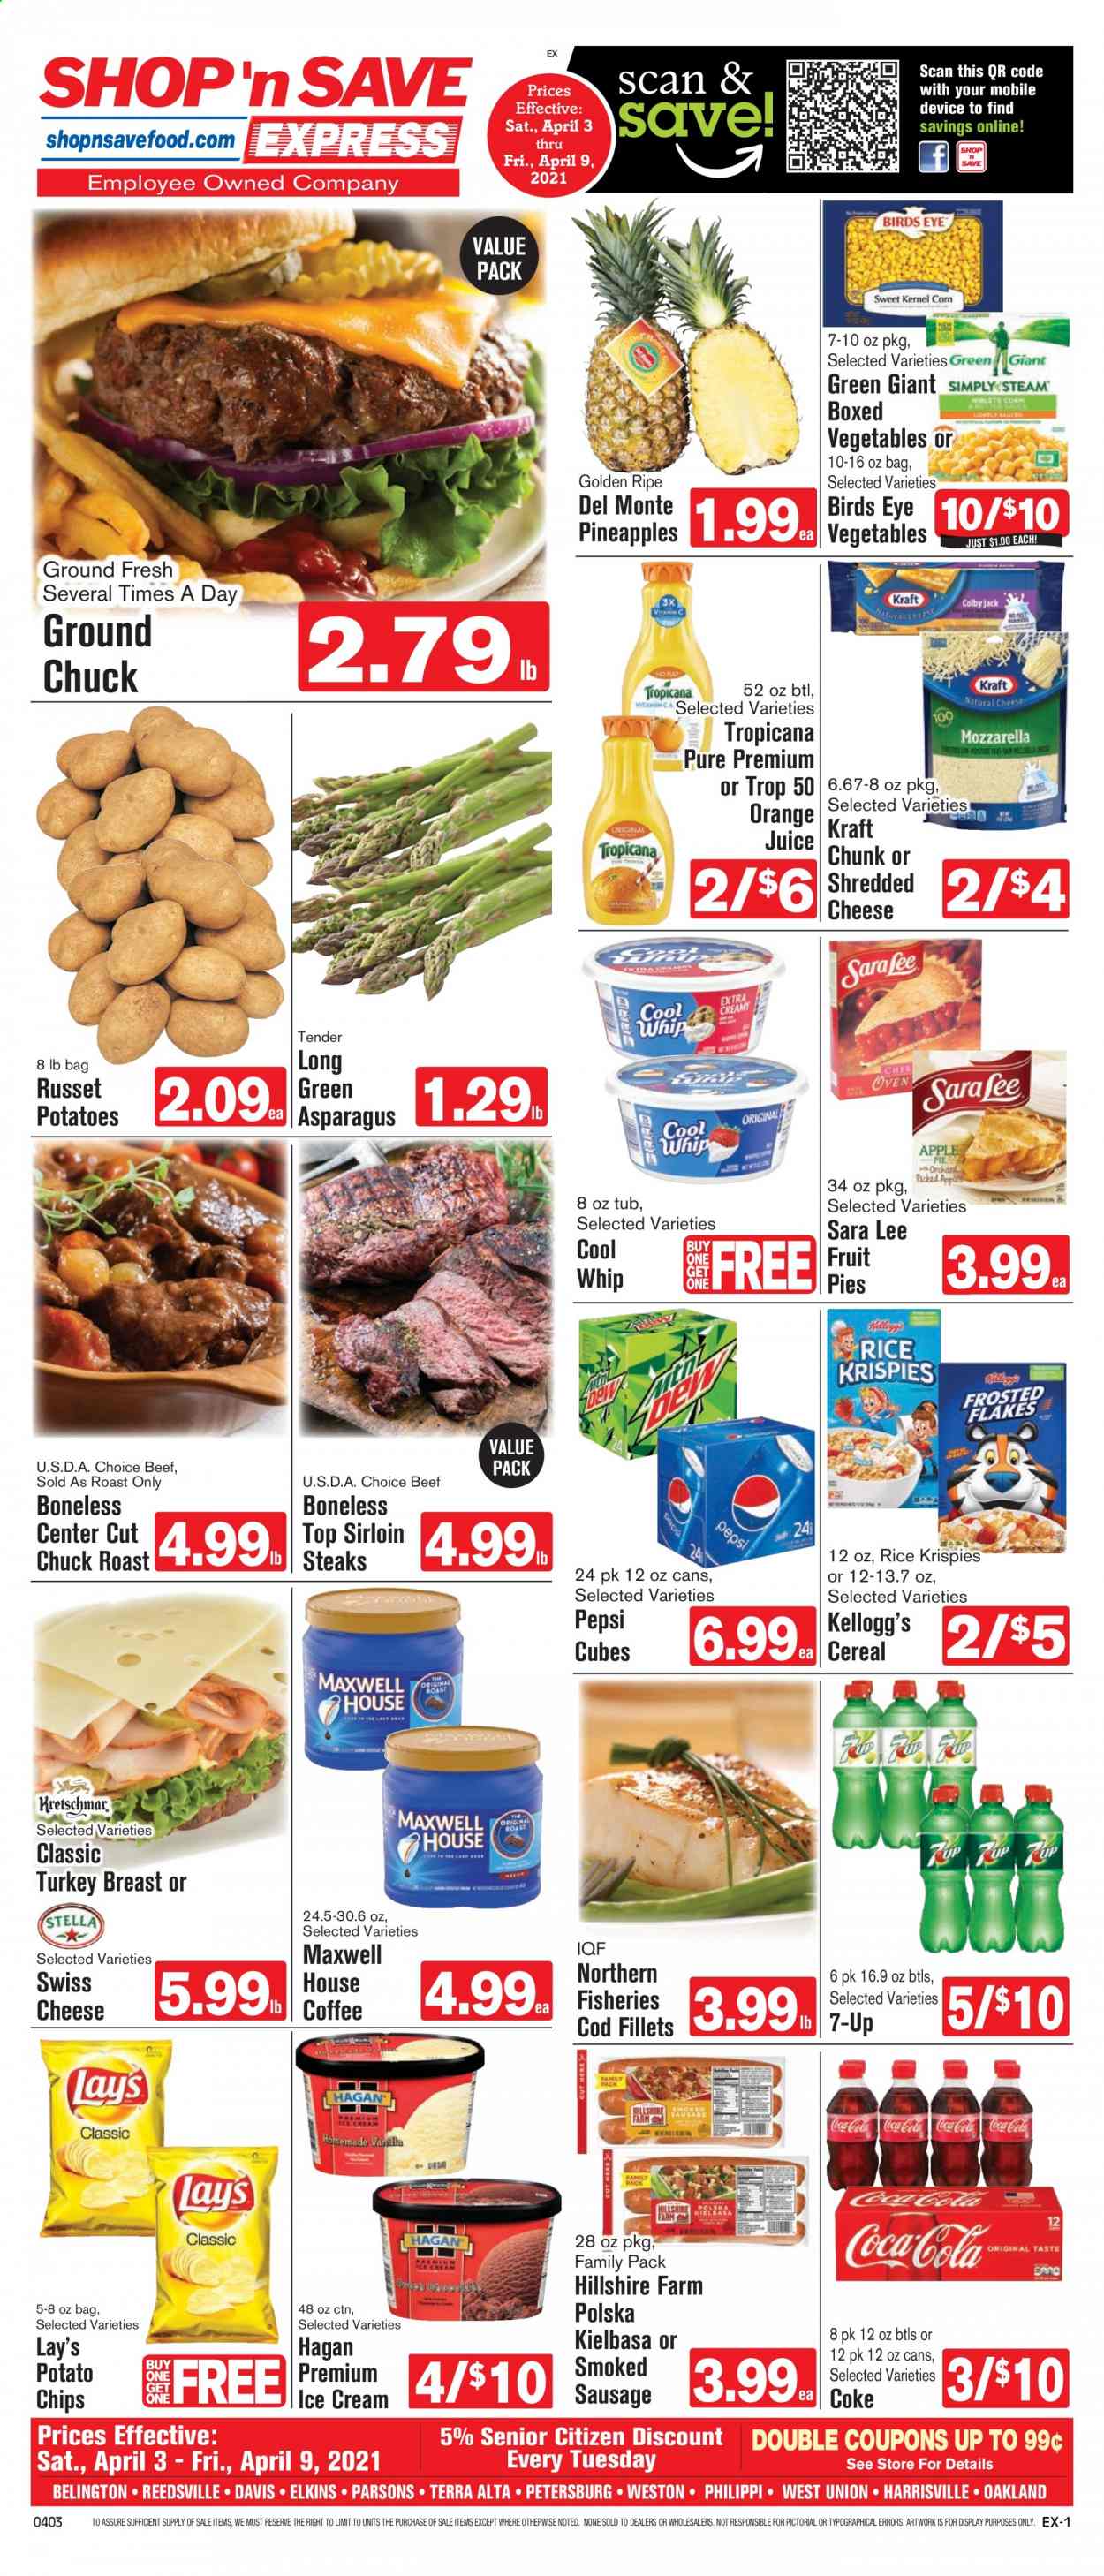 thumbnail - Shop ‘n Save Express Flyer - 04/03/2021 - 04/09/2021 - Sales products - Sara Lee, oranges, turkey breast, beef meat, ground chuck, steak, sirloin steak, chuck roast, cod, Bird's Eye, Kraft®, Hillshire Farm, sausage, smoked sausage, shredded cheese, swiss cheese, Cool Whip, ice cream, Kellogg's, chips, Lay’s, cereals, Rice Krispies, Coca-Cola, Pepsi, juice, 7UP, Maxwell House, coffee, asparagus, russet potatoes, pineapple. Page 1.